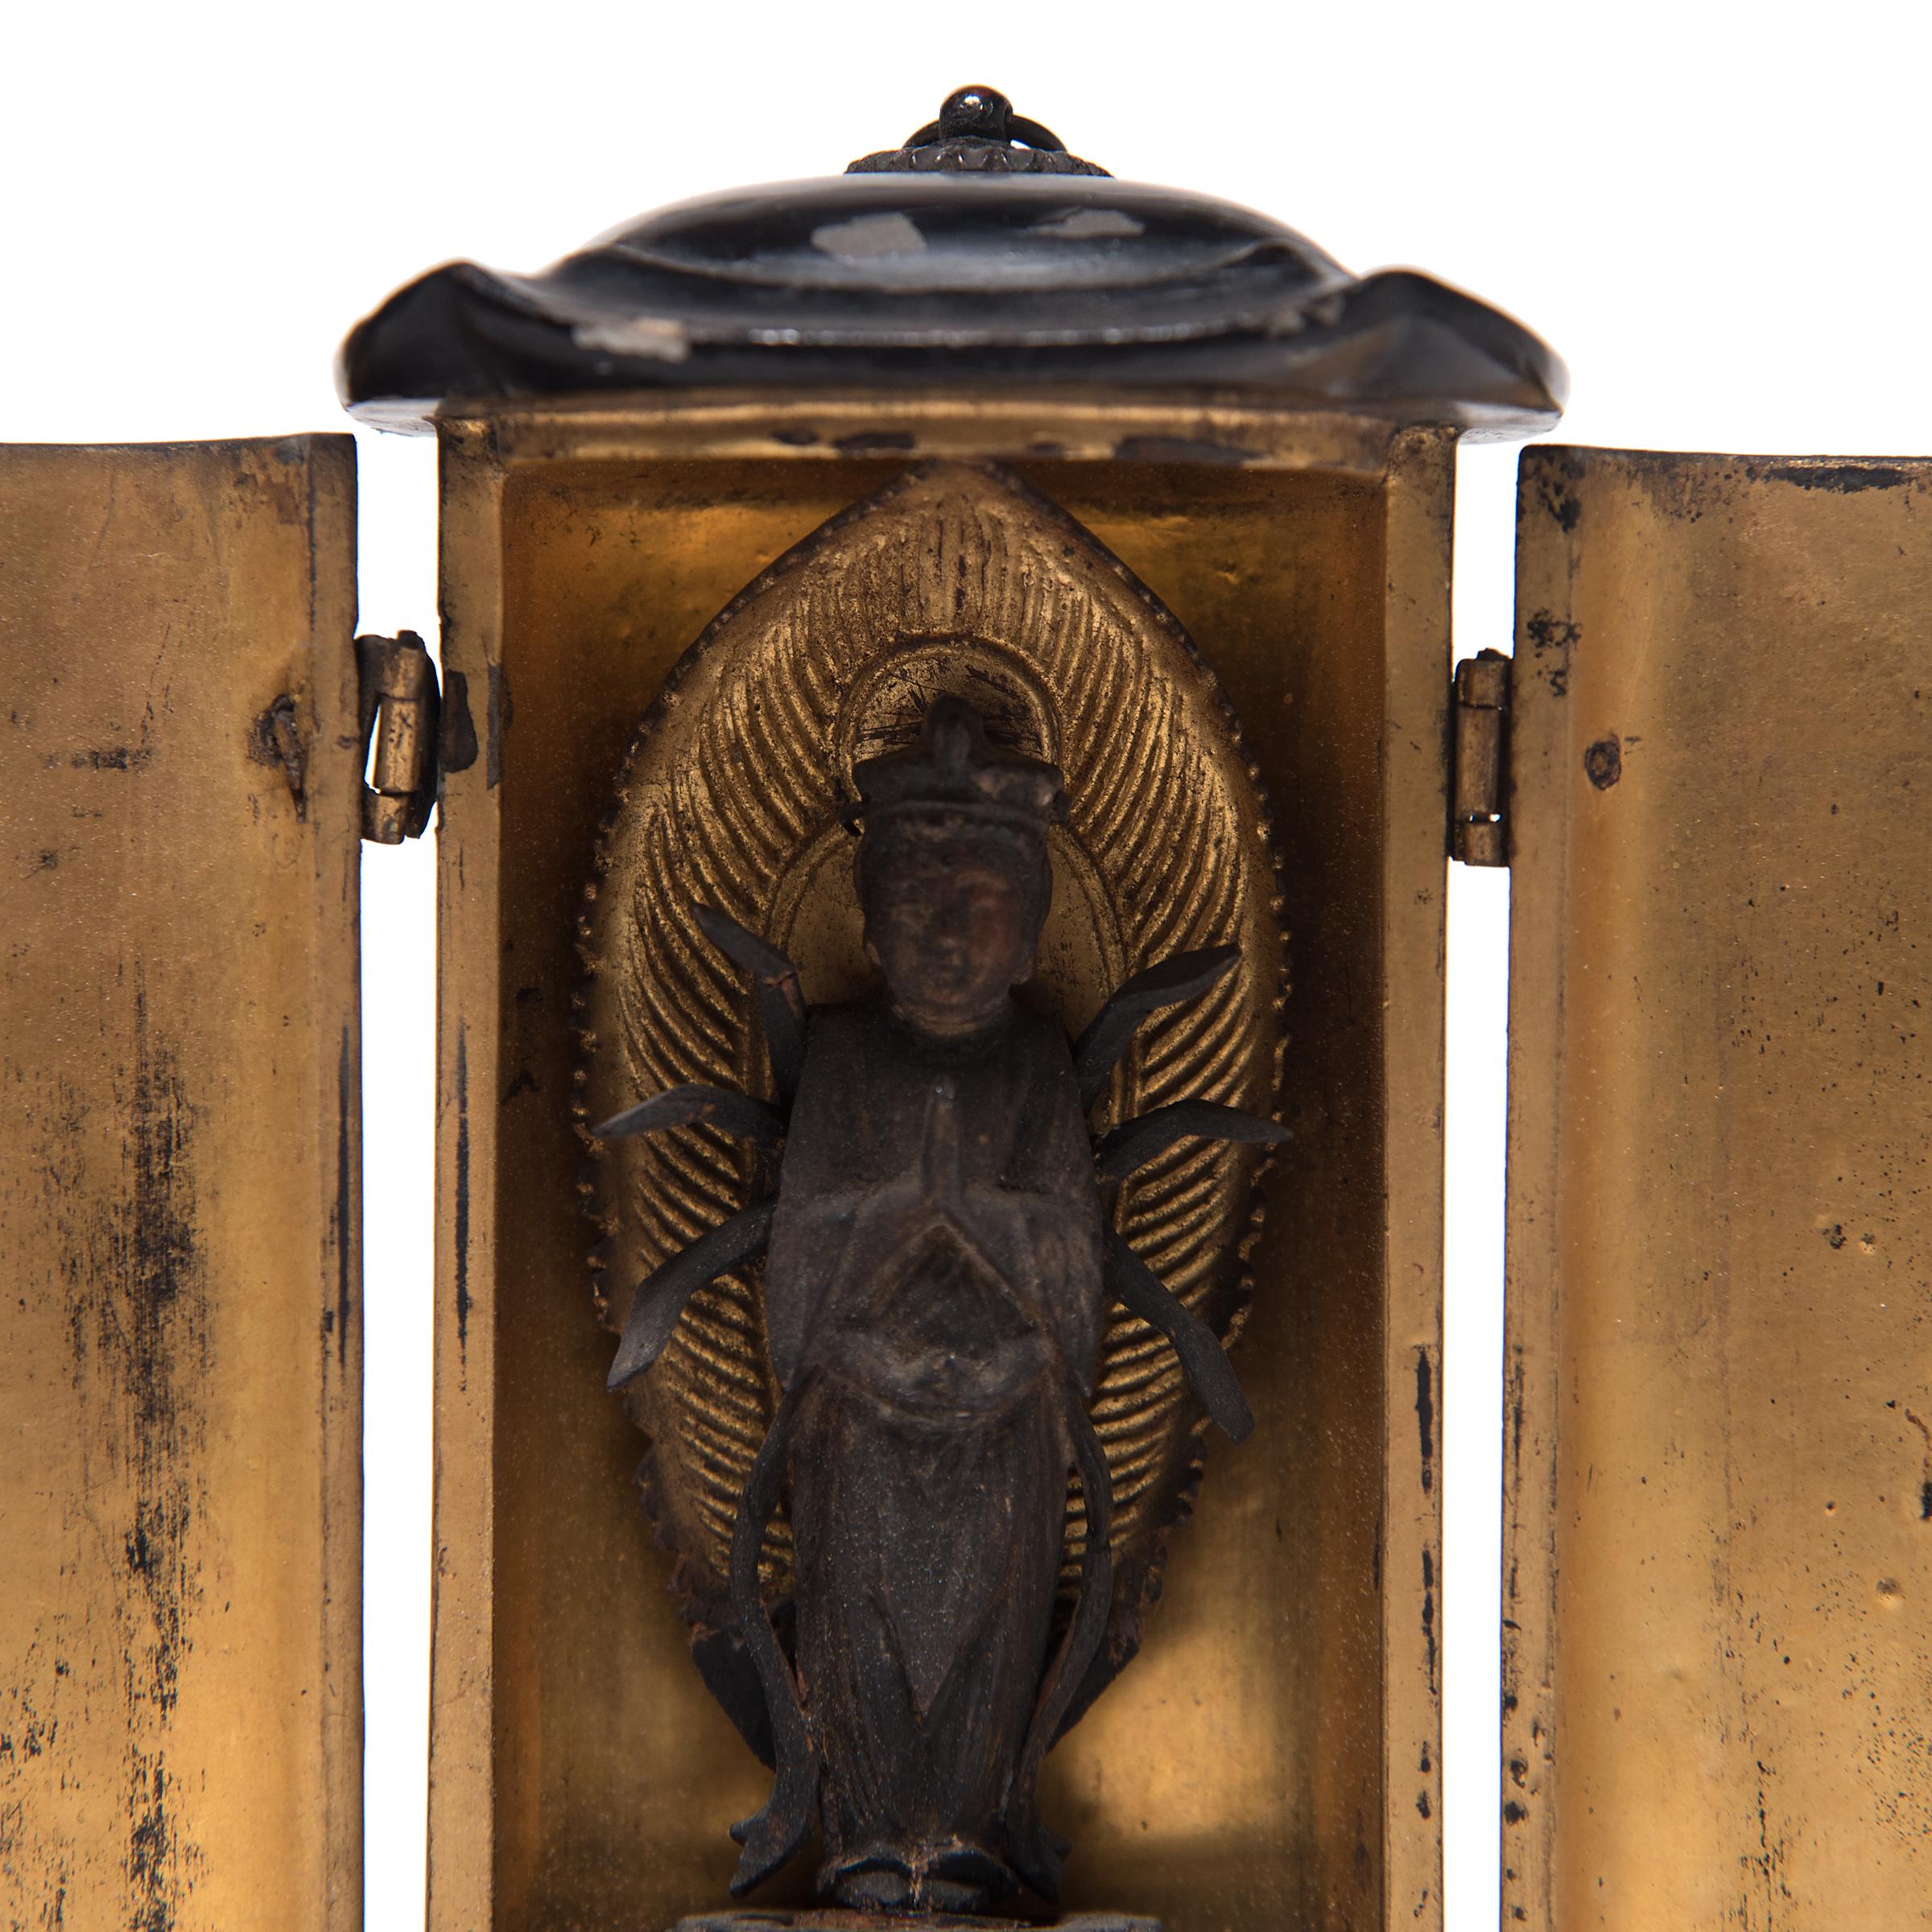 The simple exterior of even black lacquer that encases this traveling shrine belies the splendor within. The hinged doors open to a gilt interior framing the central figure of a resplendent Bodhisattva. Made in the 19th century, this petite Japanese